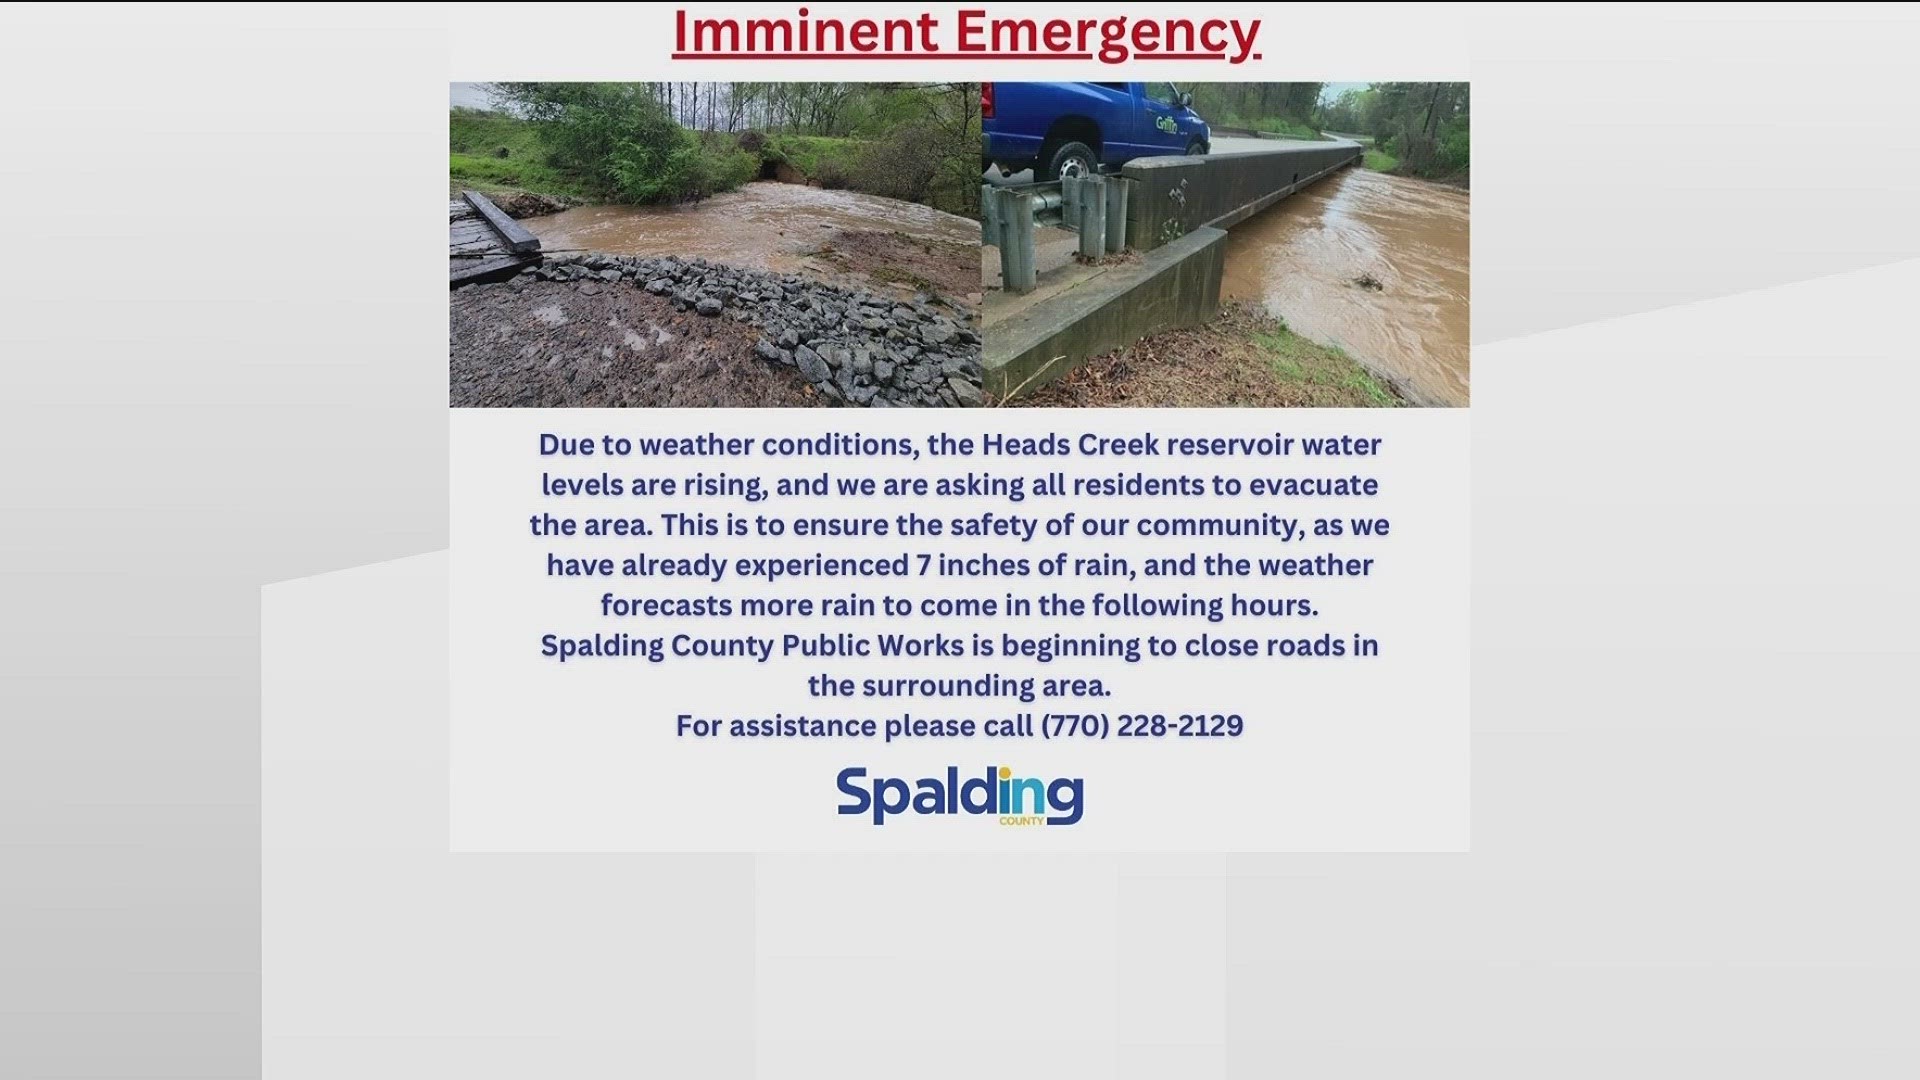 Officials with the Spalding County Sheriff's Office have asked some residents to evacuate in the vicinity of Heads Creek Reservoir.